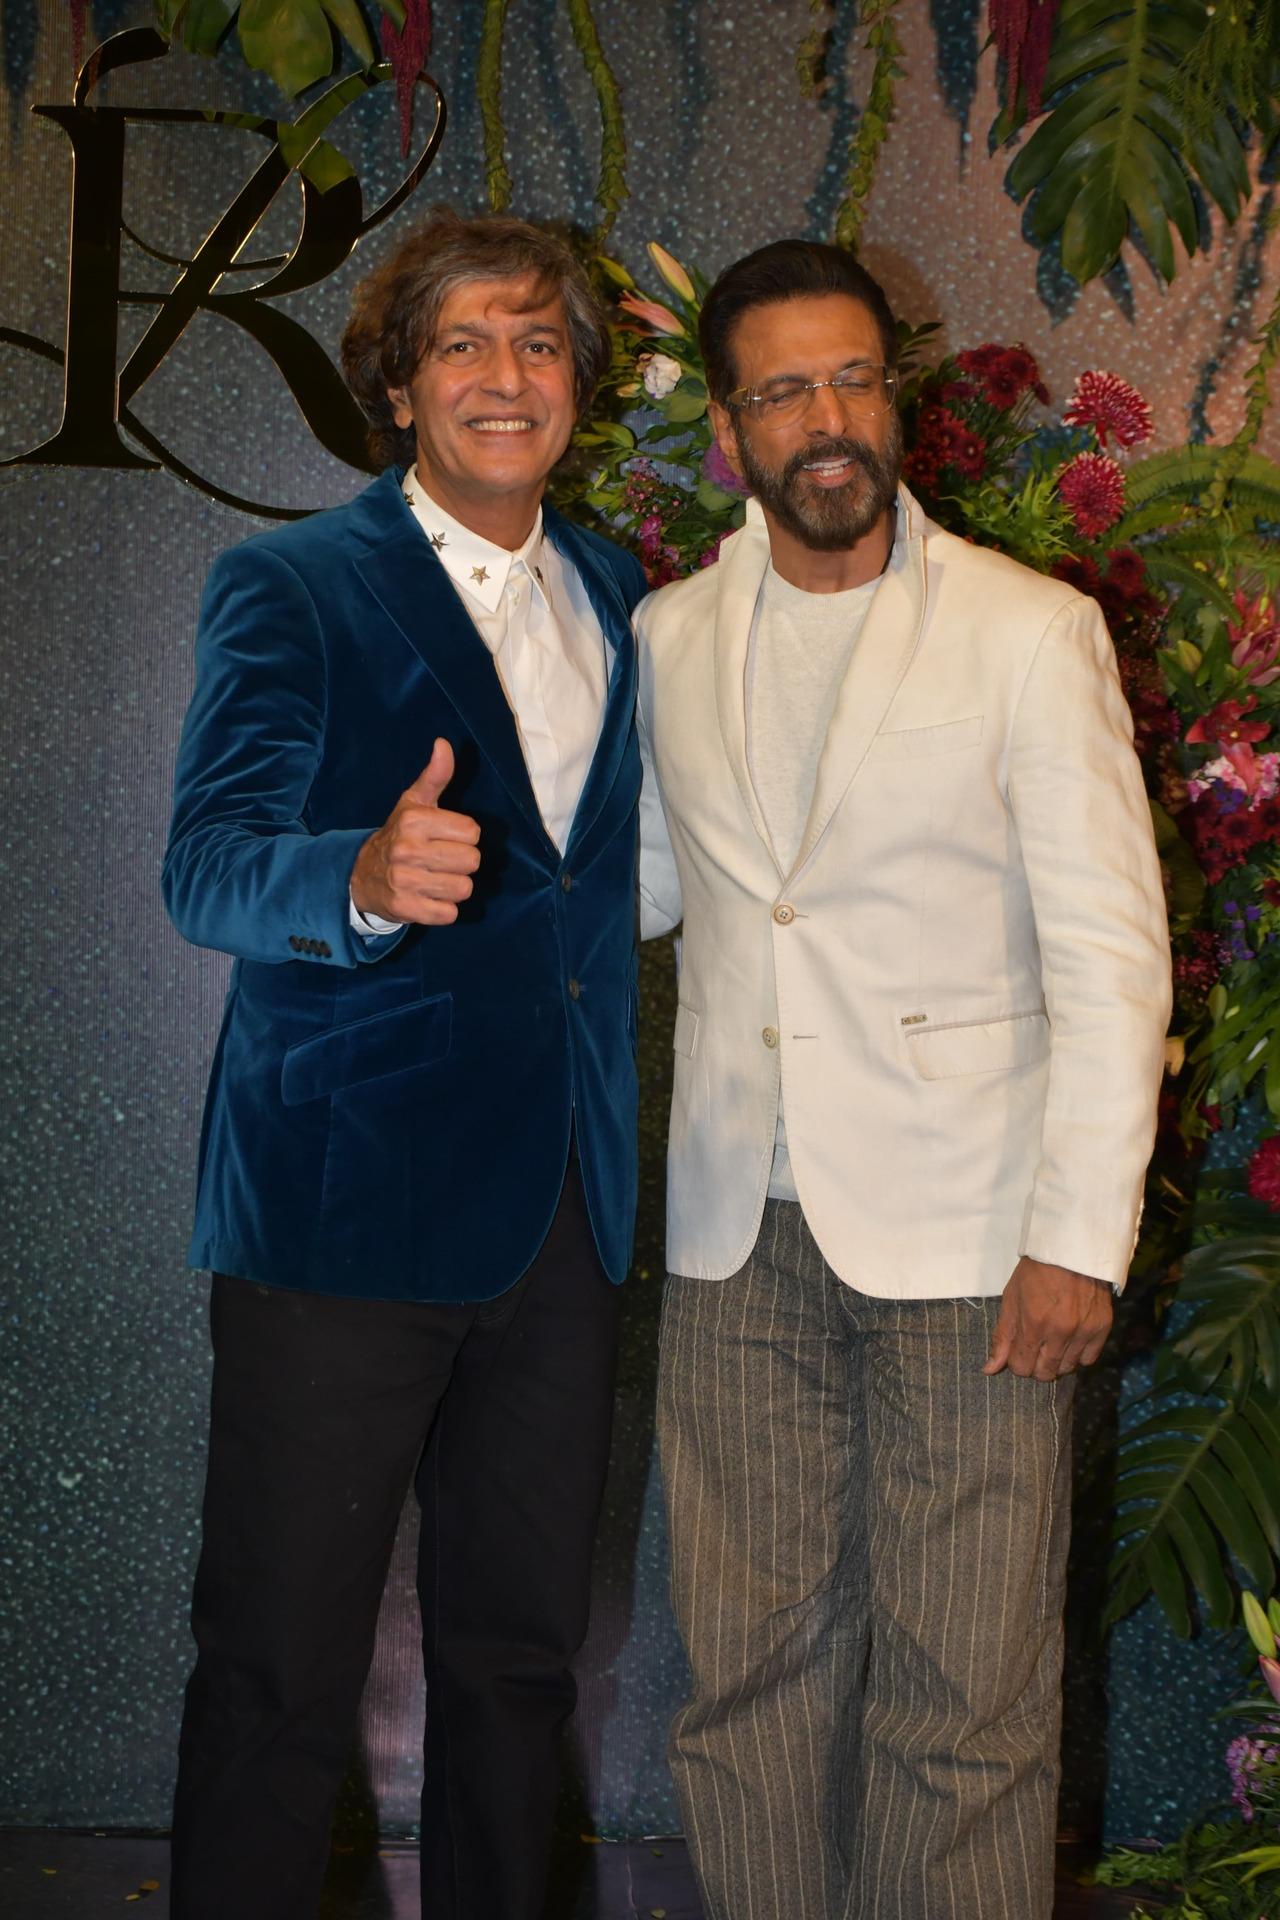 Chunky Panday wore a smart blue blazer and black pants, while Javed Jaffrey was seen wearing a white blazer with checkered pants. (Pic/Yogen Shah)